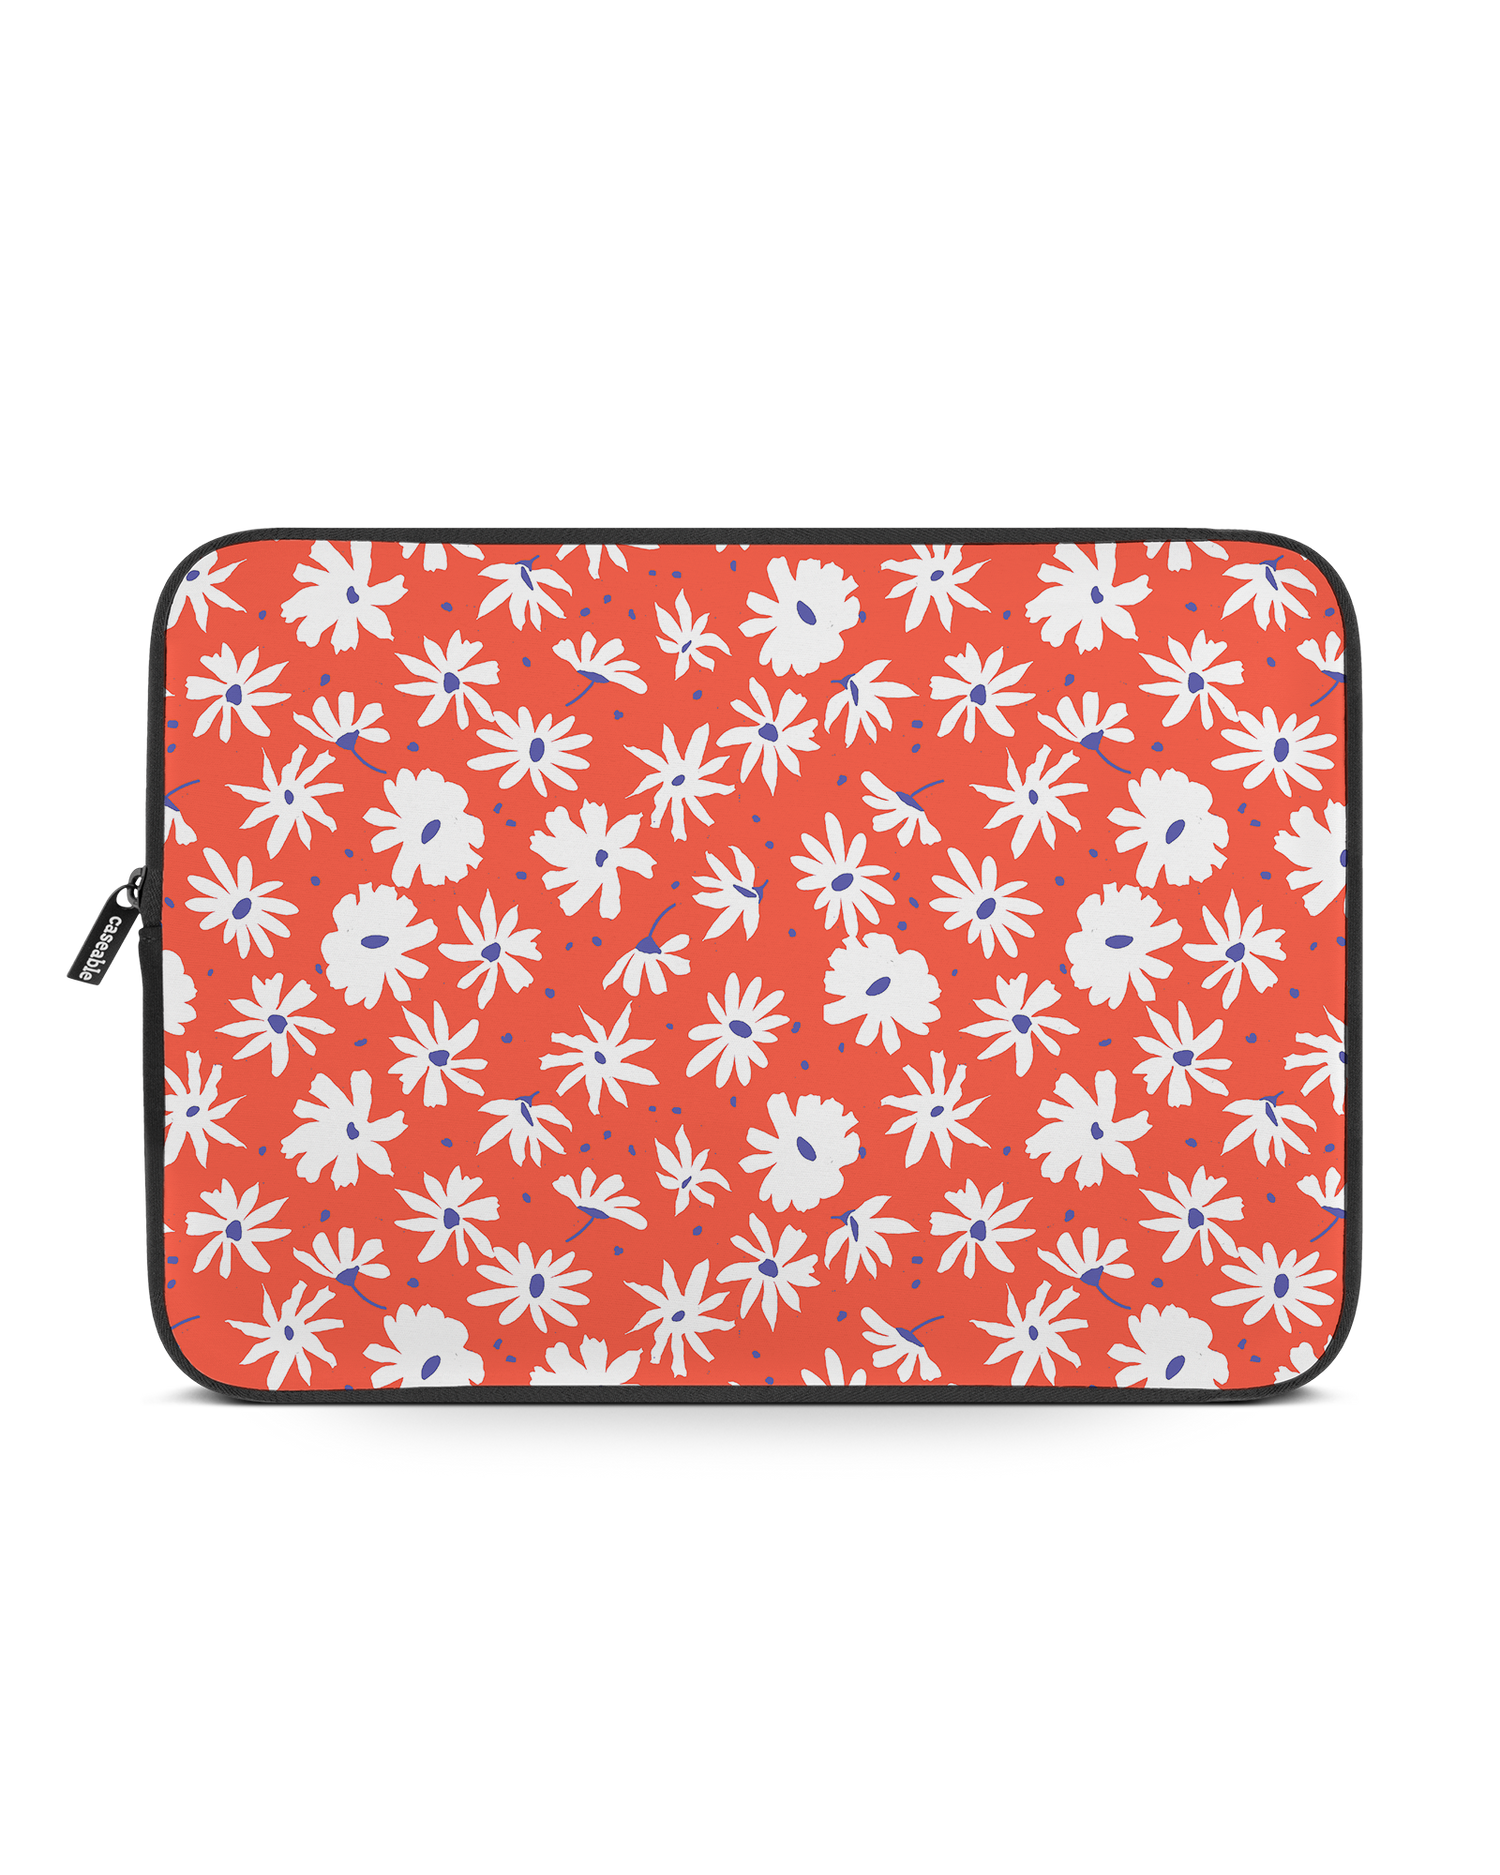 Retro Daisy Laptop Case 14-15 inch: Front View